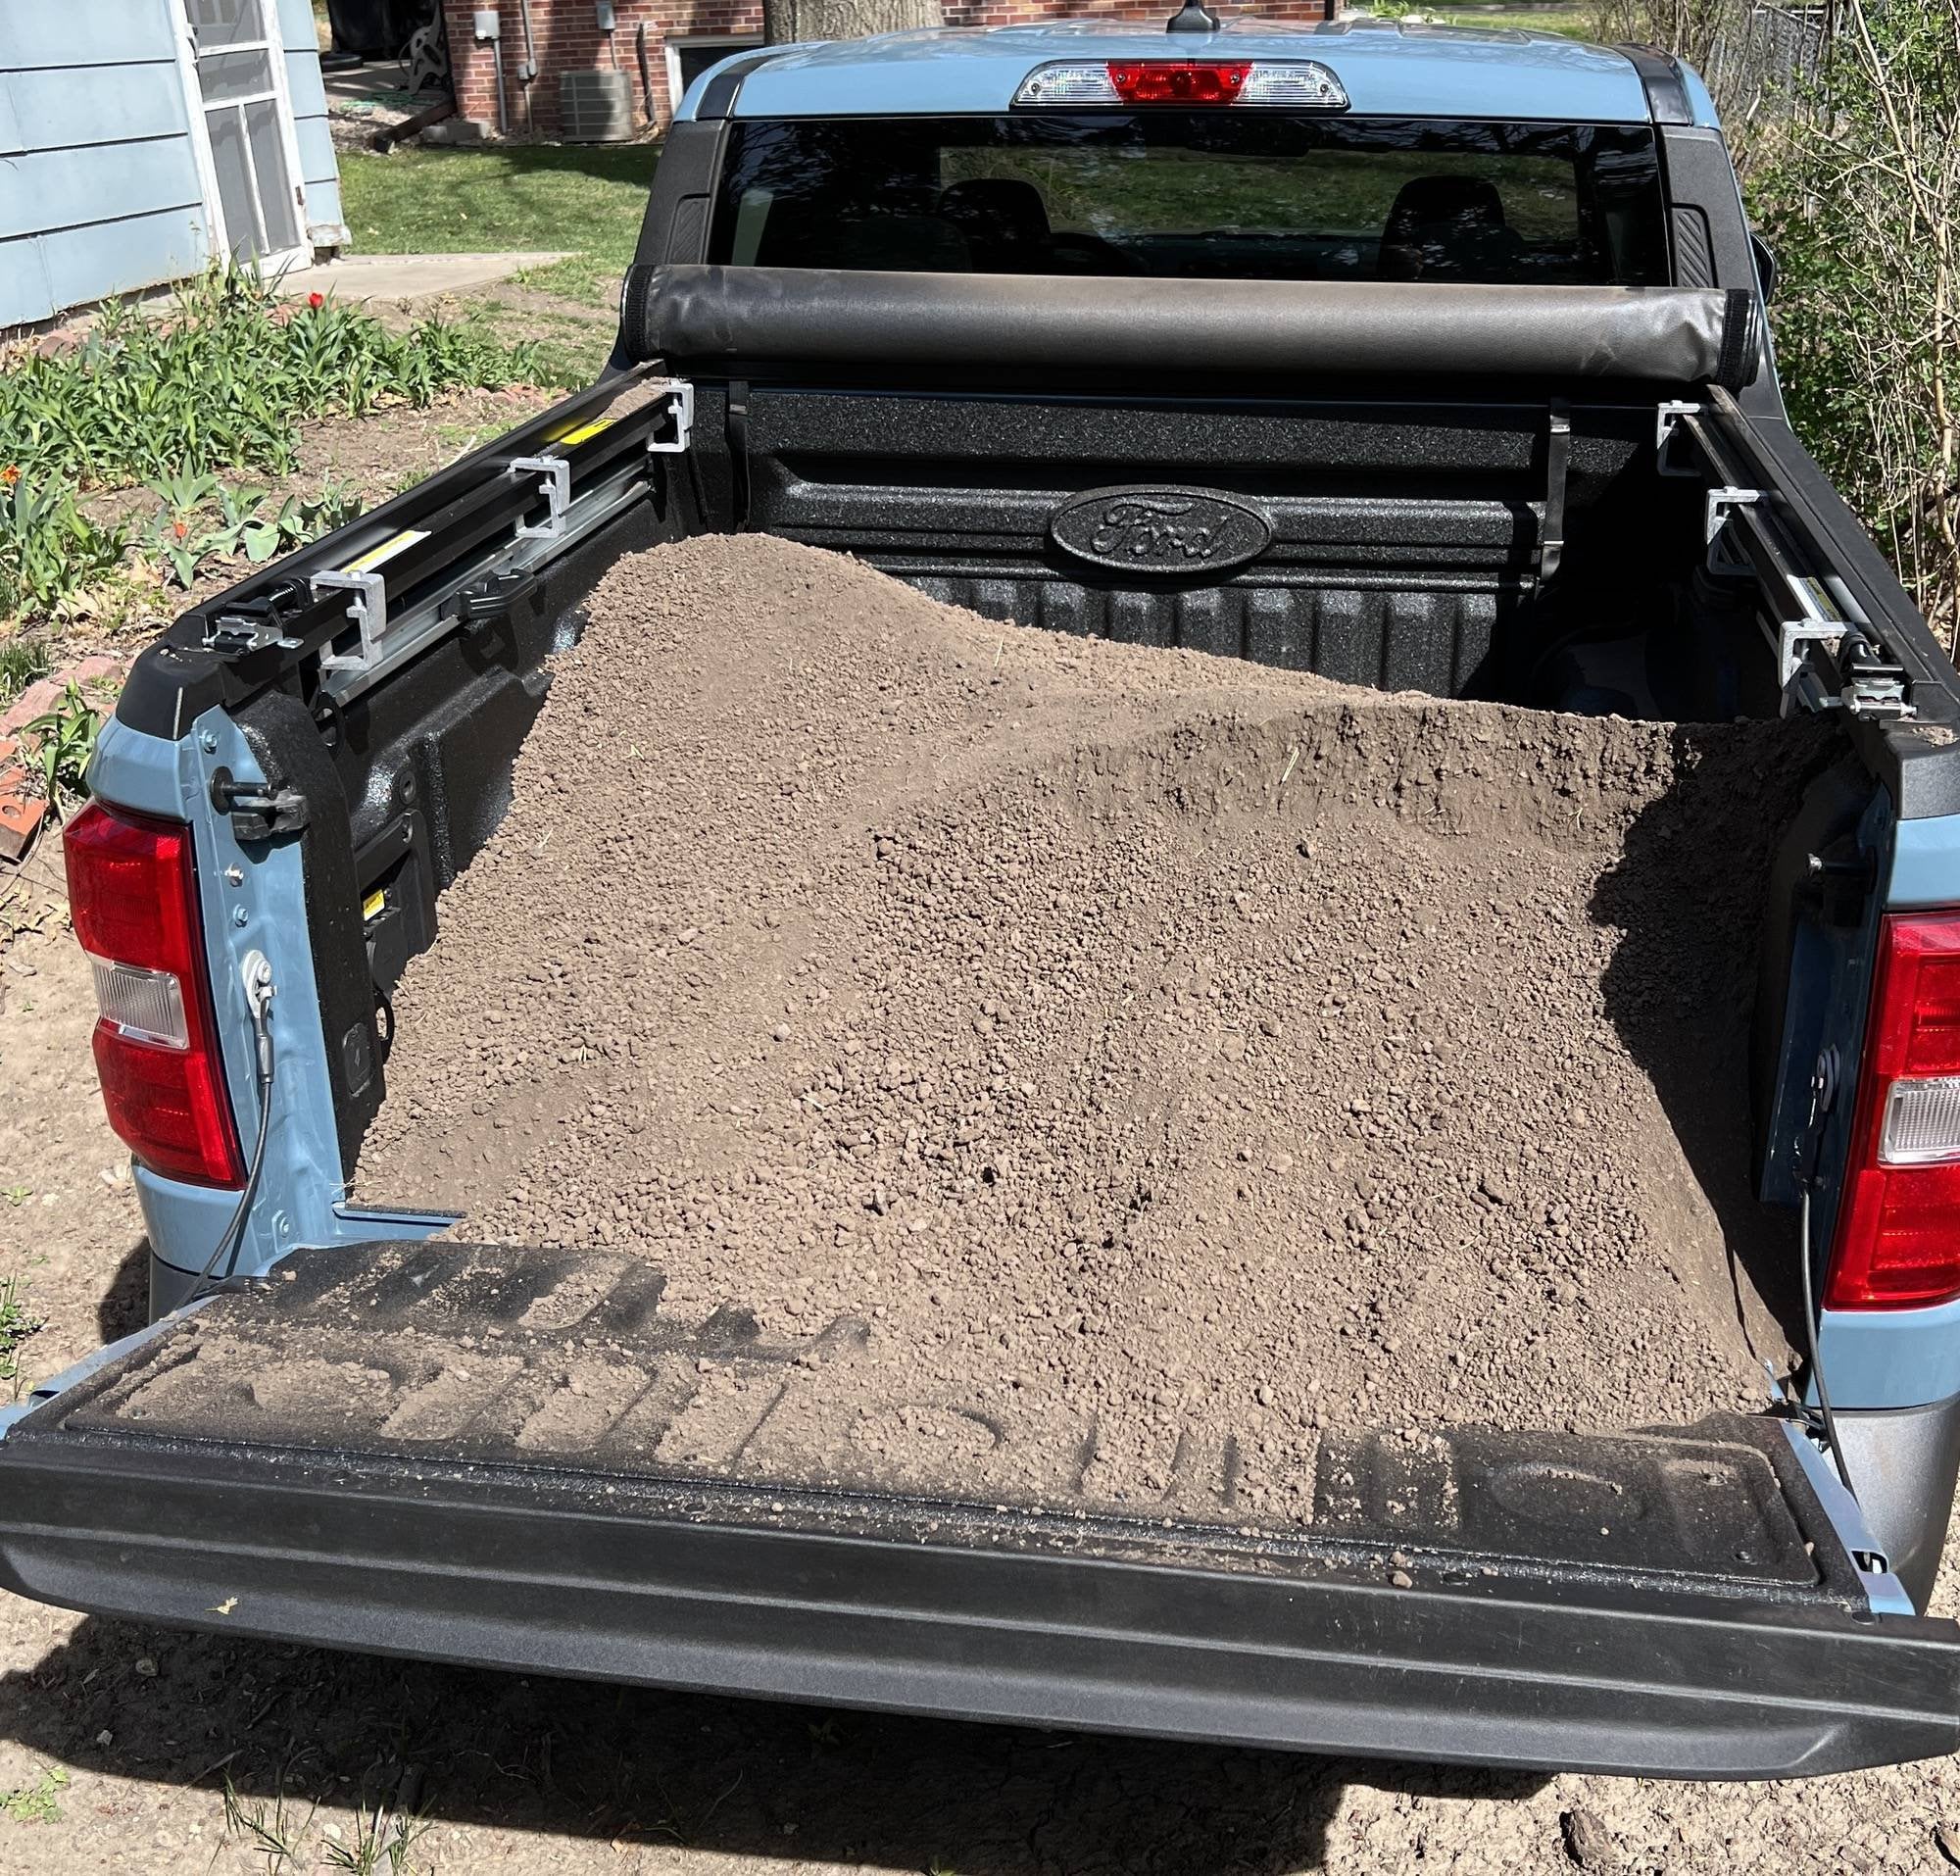 How Many Yards of Dirt Can a F150 Hold